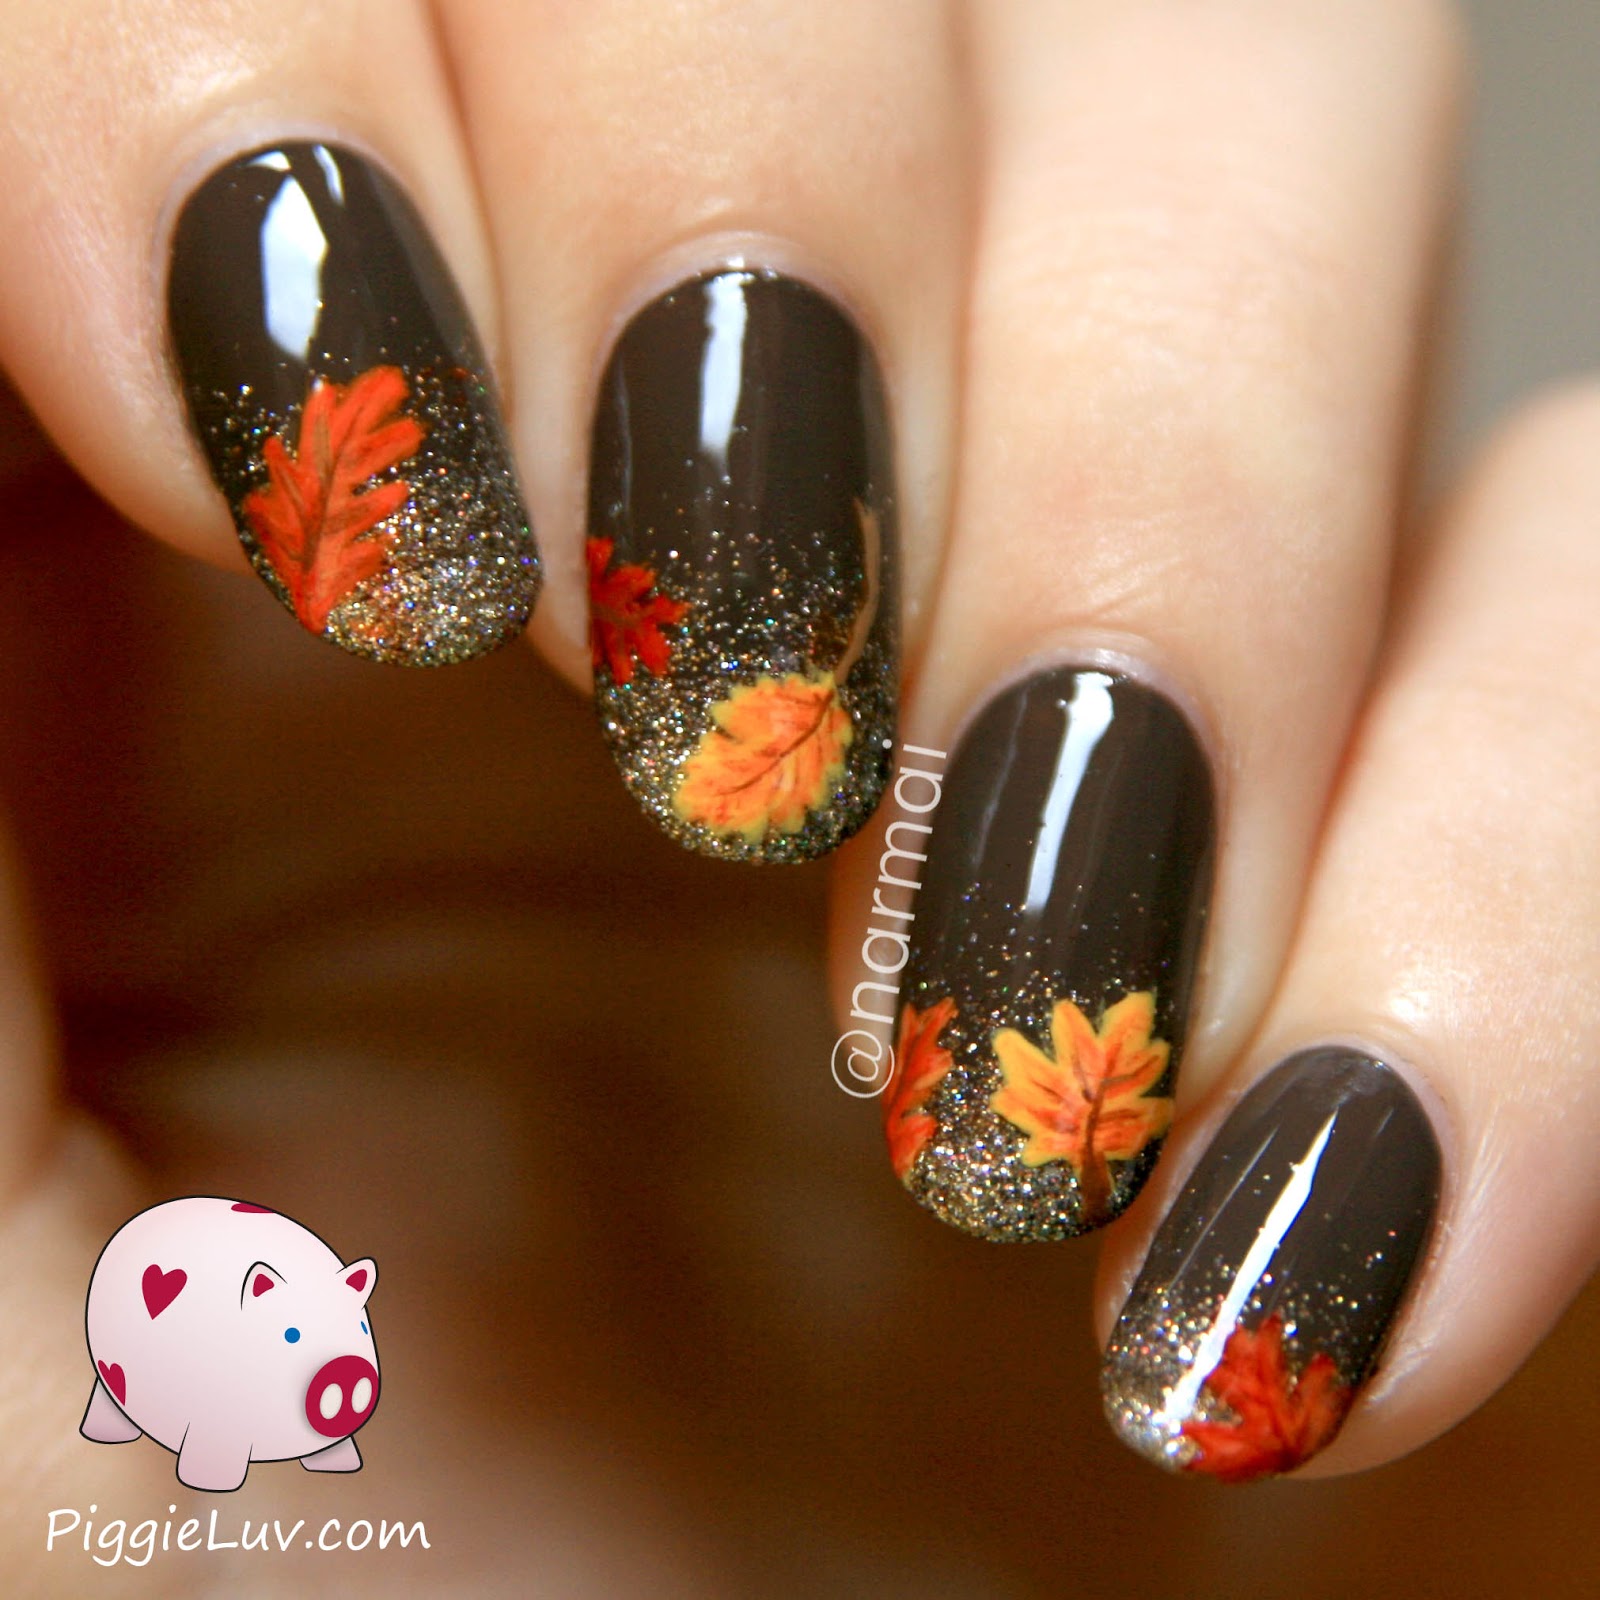 image 4 Fall Nail Designs at Home: Step-by-Step Guide for Beautiful Autumn Nails